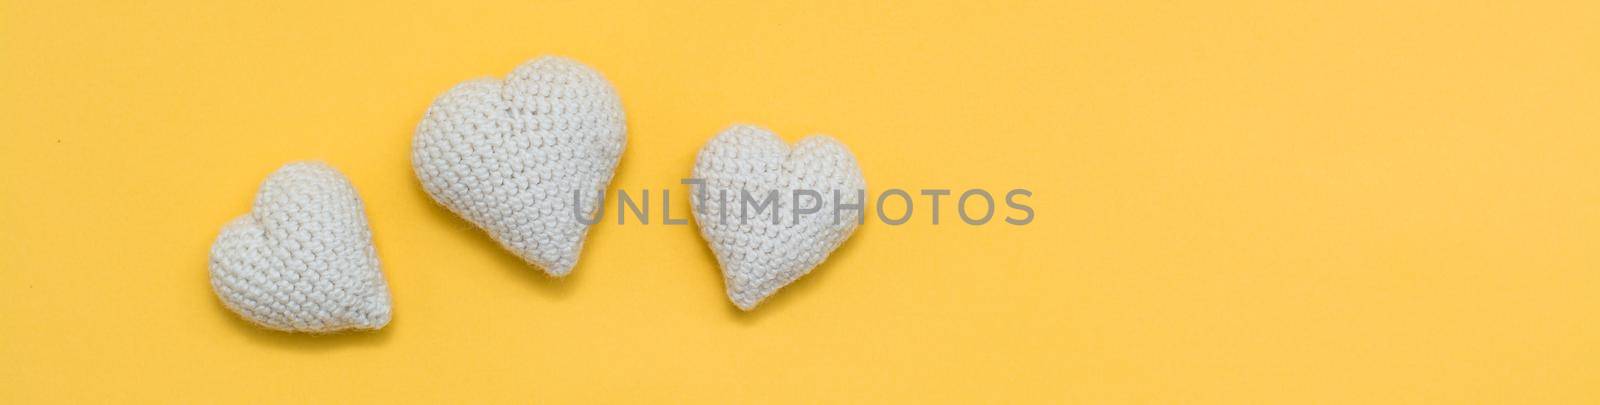 Handmade for Valentine's Day. Knitted white hearts on a yellow background. Web banner